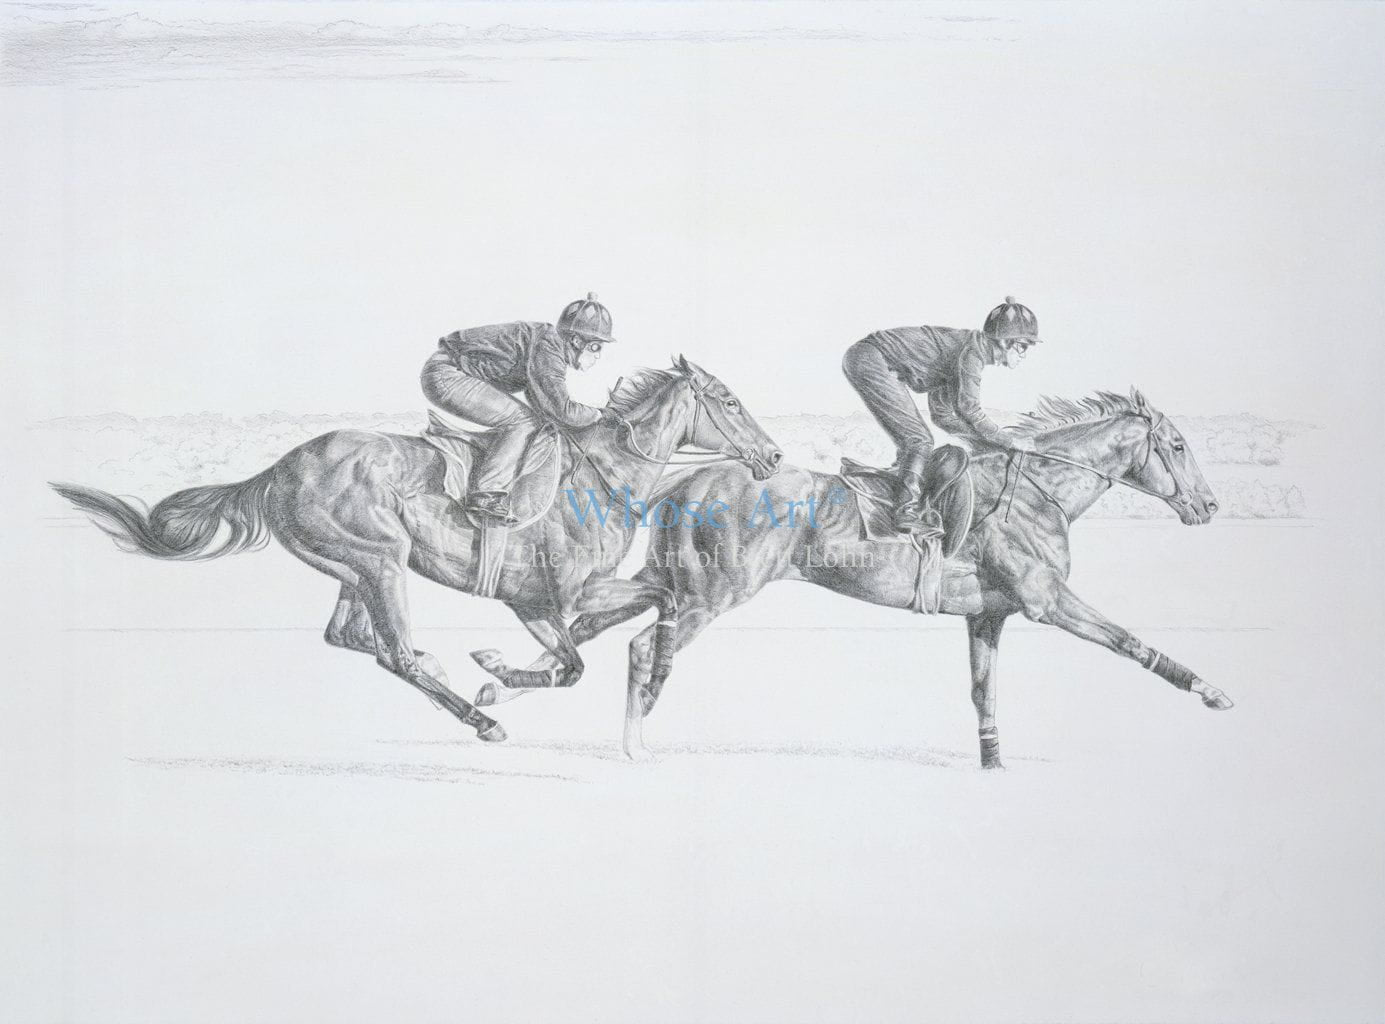 Black and white horse art drawing of racehorses galloping together in training. Drawn in pencil, the lead horse is a grey.